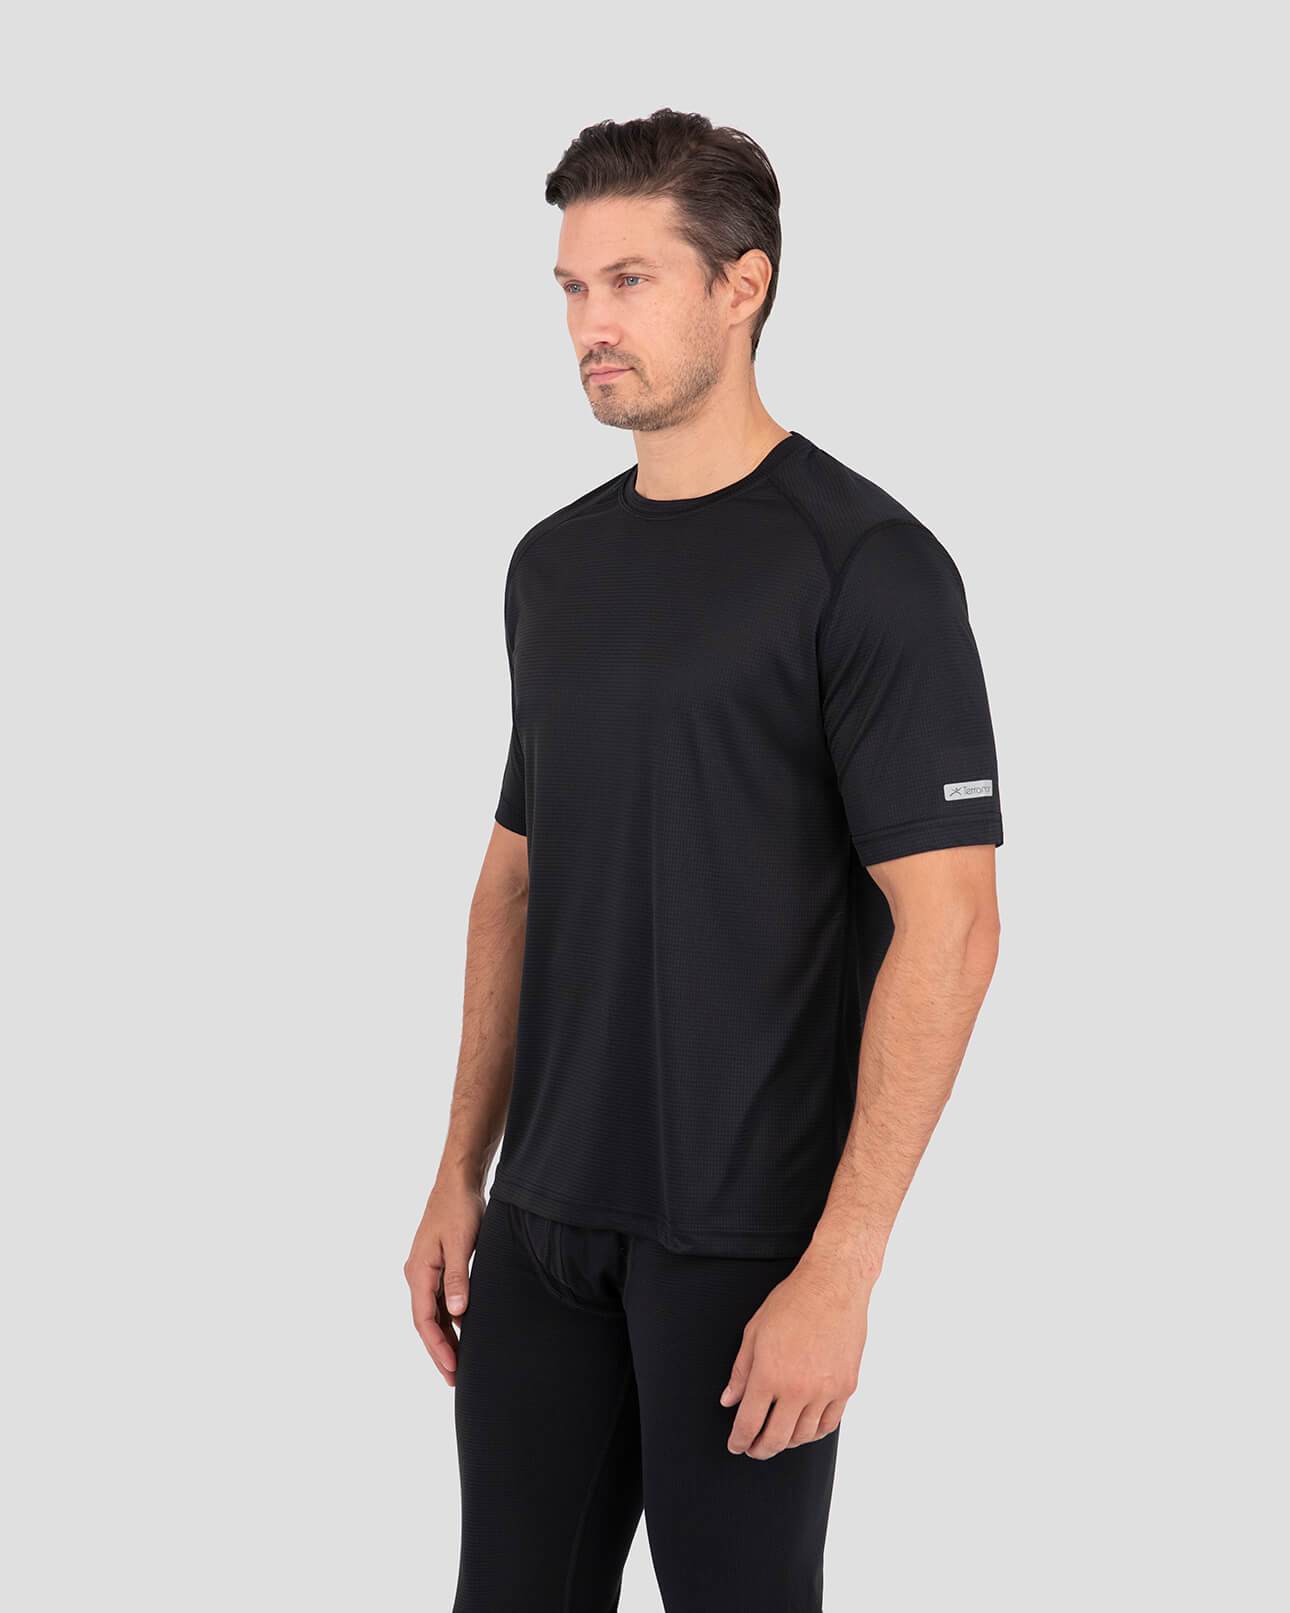 Men's Transport® Lightweight Recycled Polyester Thermal Short-Sleeve Shirt | Color: Black